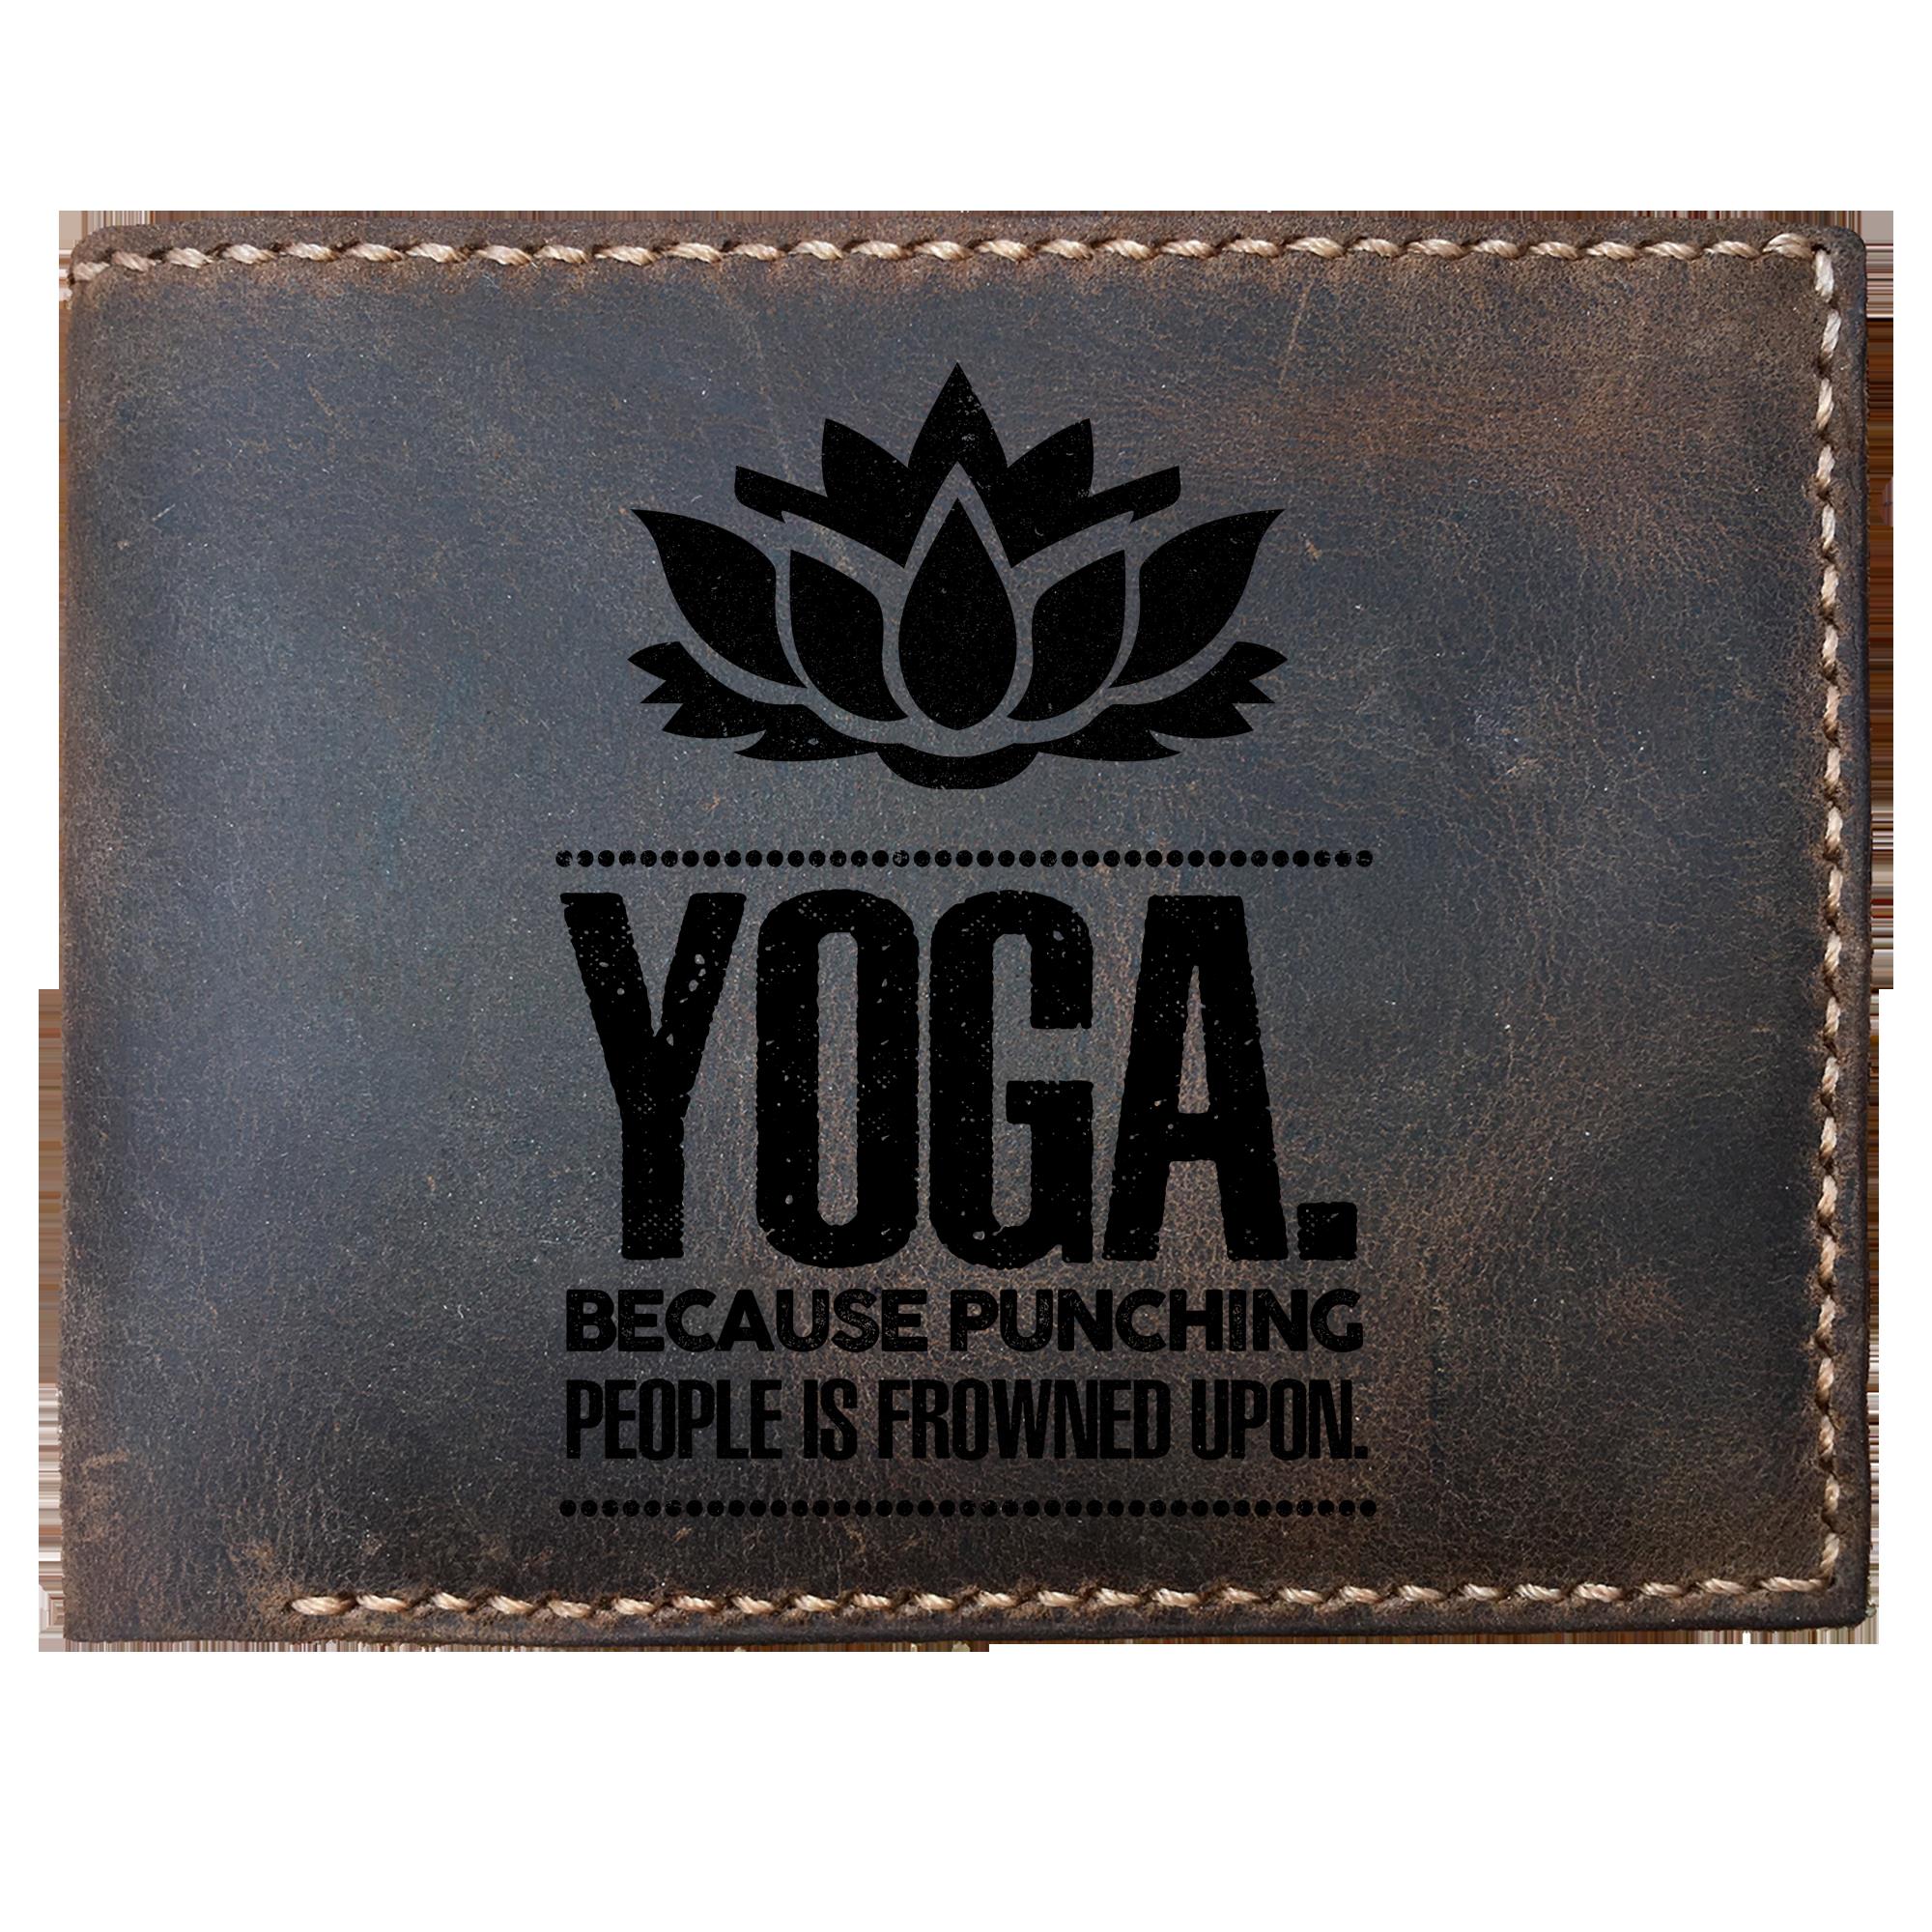 Skitongifts Funny Custom Laser Engraved Bifold Leather Wallet For Men, Yoga Because Punching People Is Frowned Upon